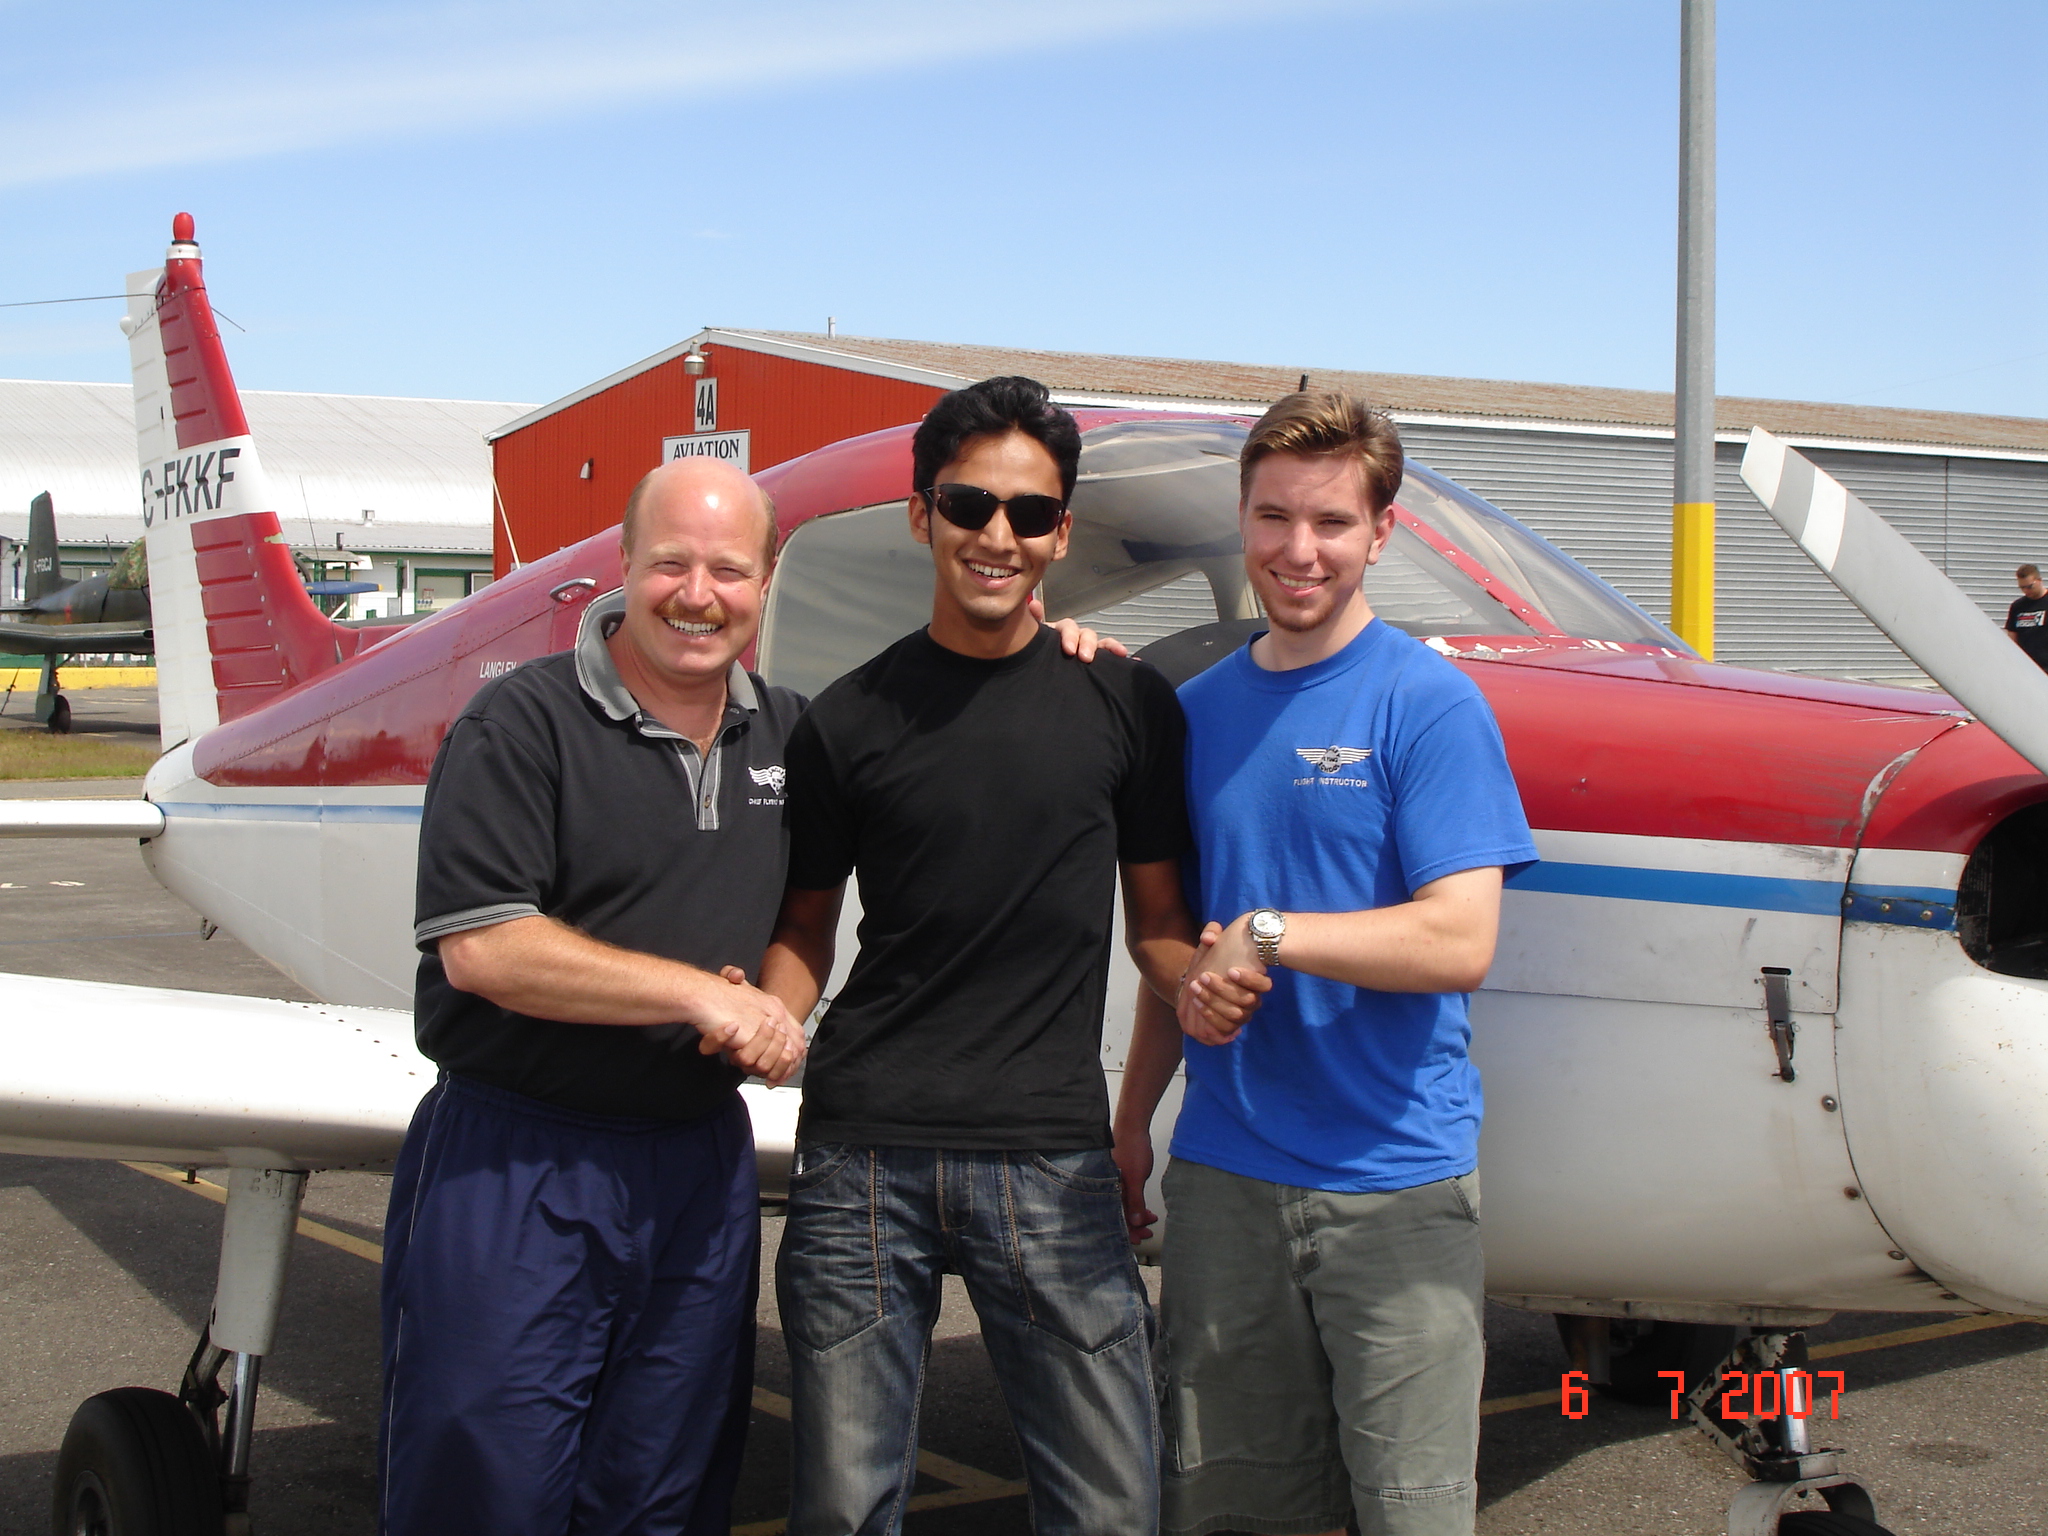 Naif Malvankar with David Parry and Philip Craig after the successful completion of his Private Pilot Flight Test, Langley Flying School